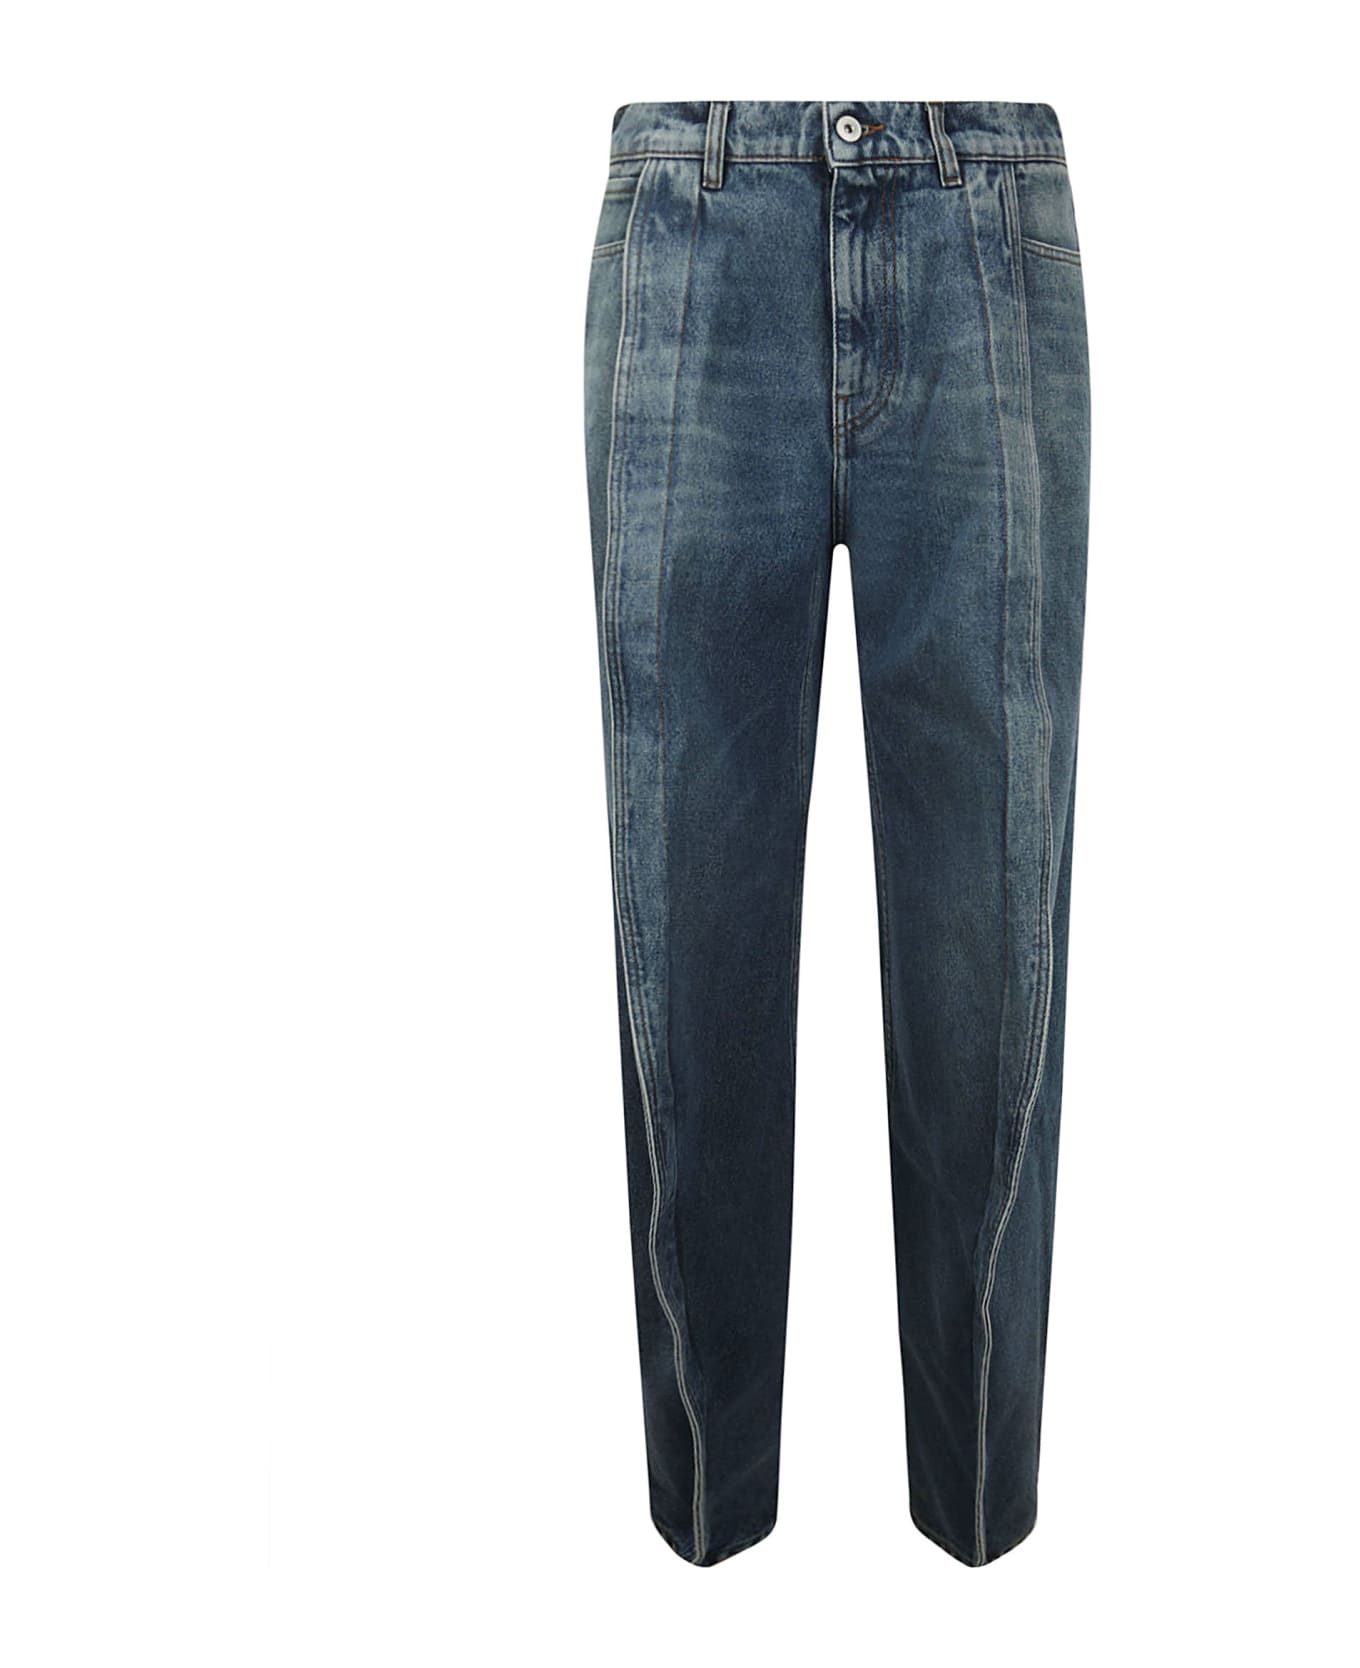 Y/Project Evergreen Banana Jeans - EVERGREEN VINTAGE BLUE デニム